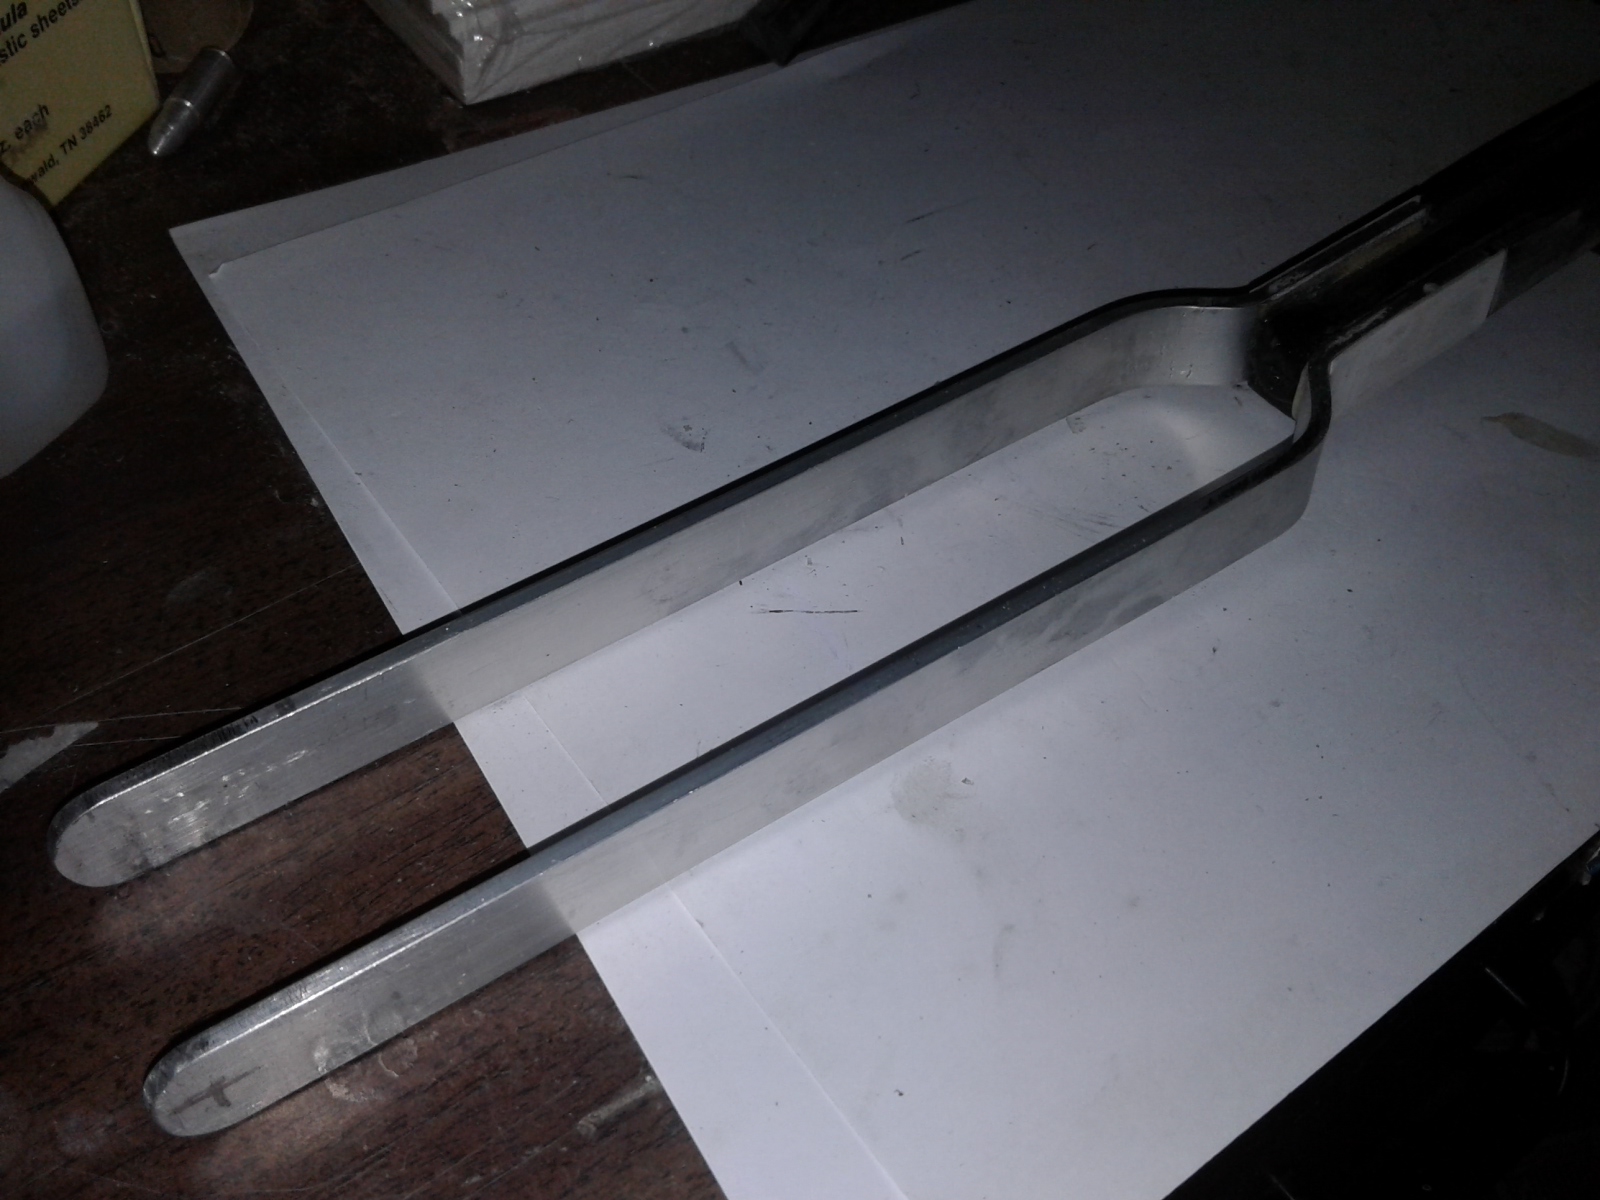 I am now working on the Folding Stock. Here I have replaced the cast arms with those made from Aluminium for strength.